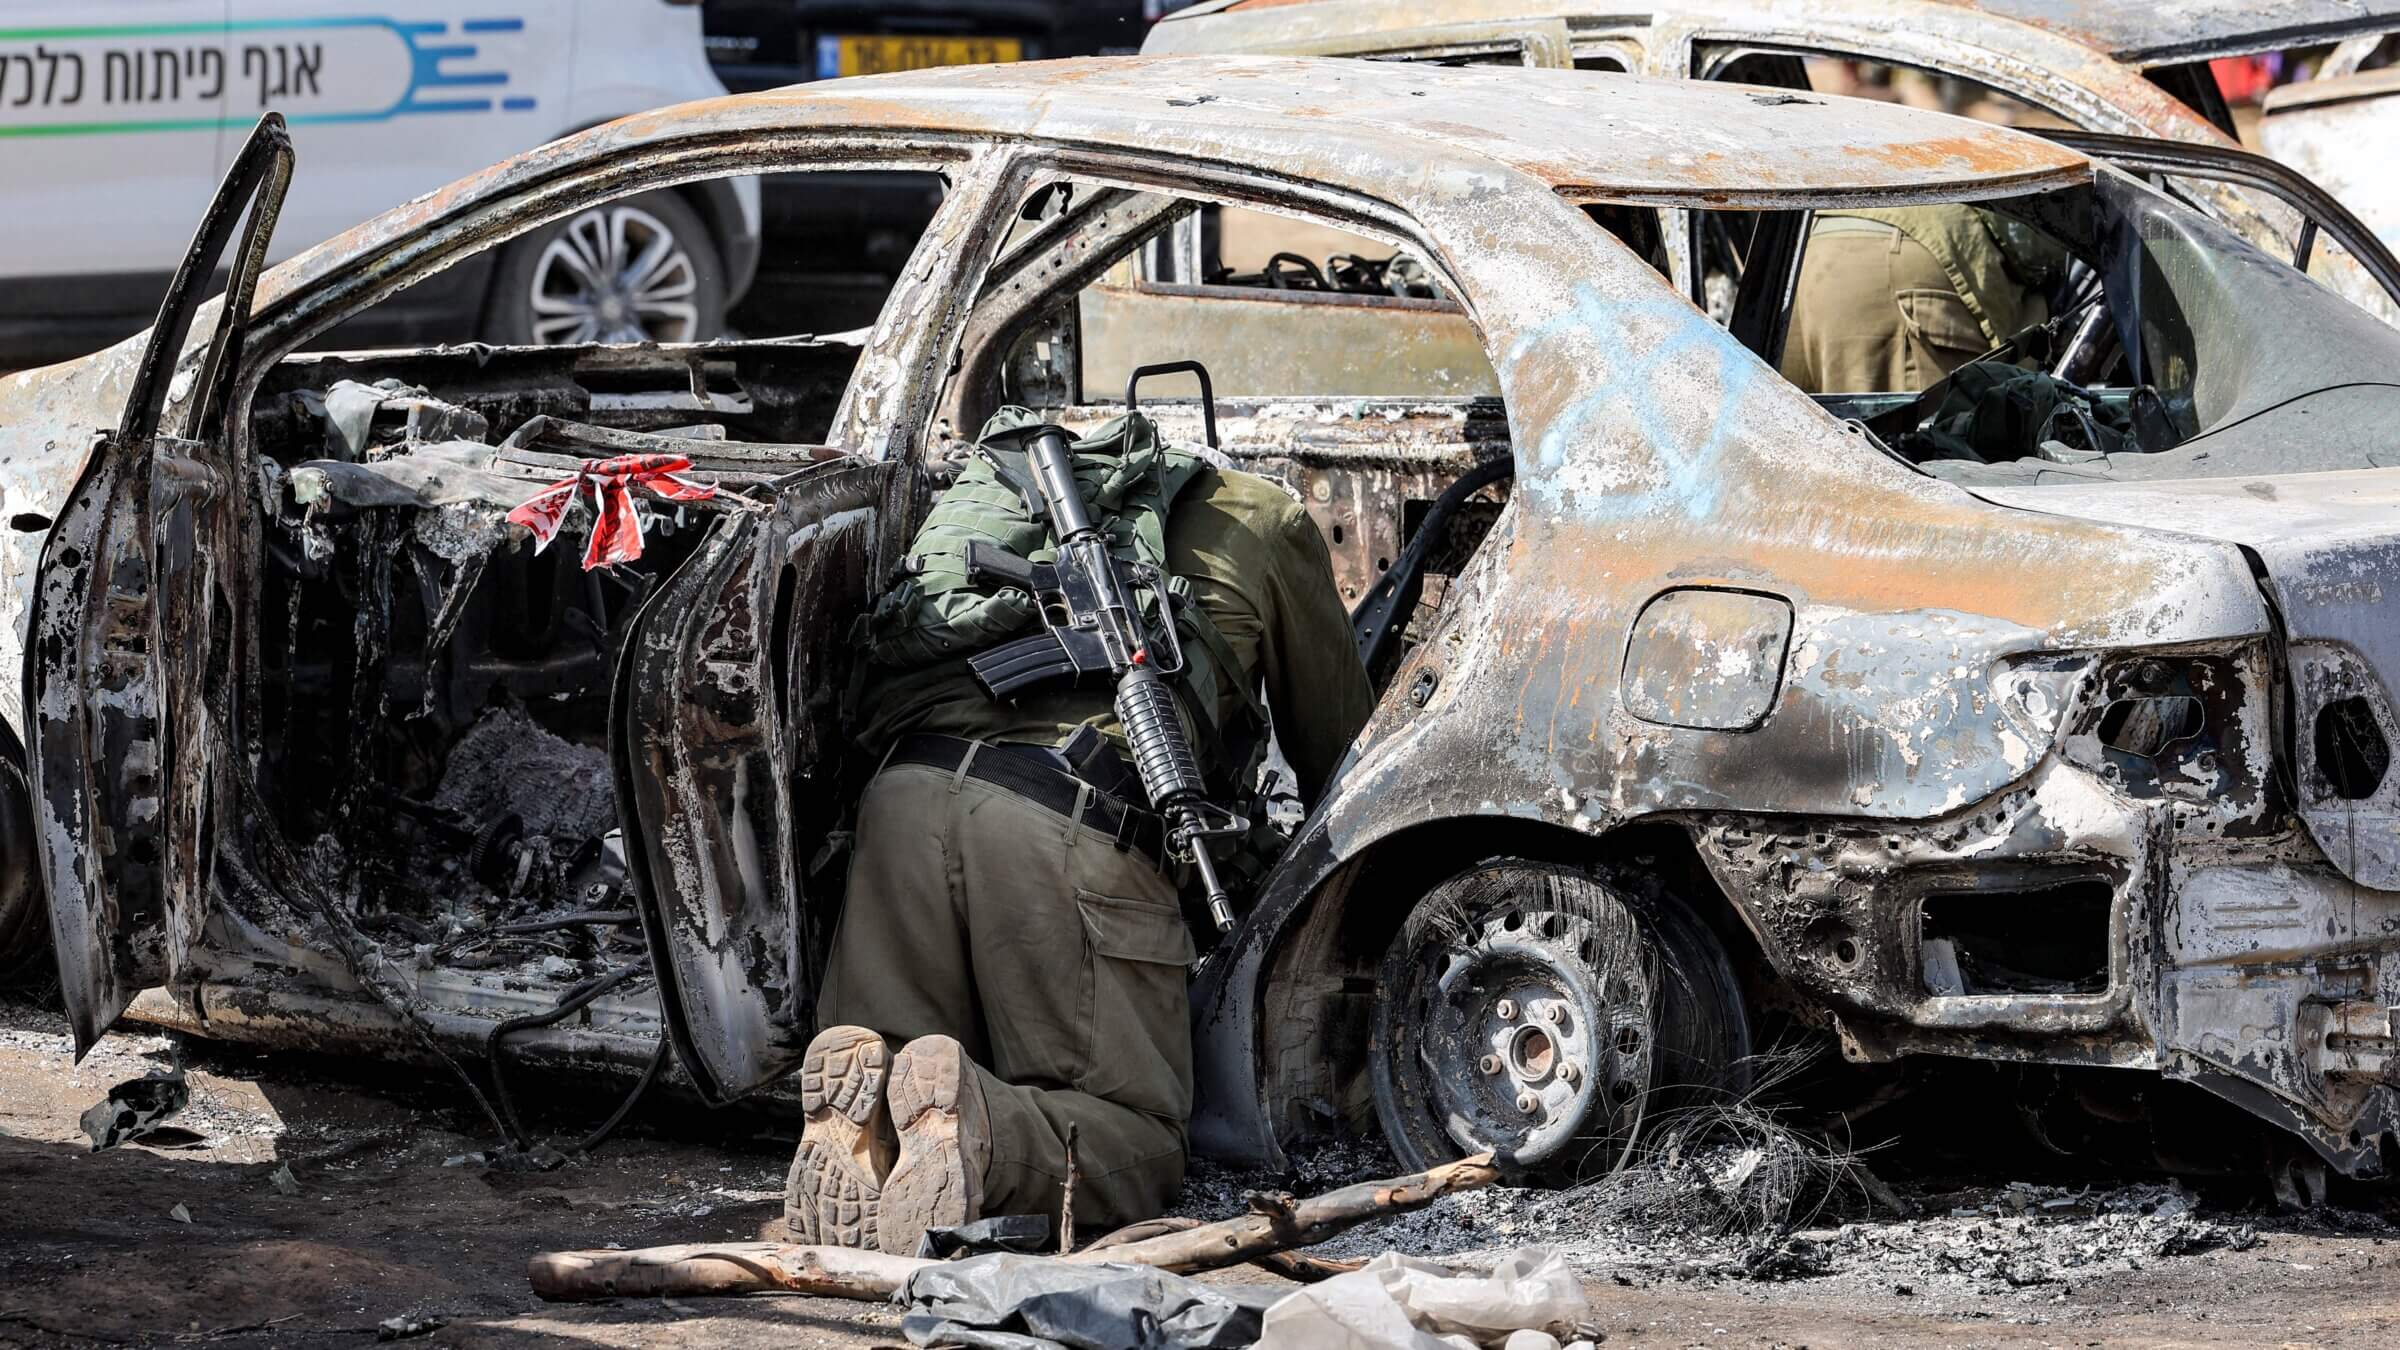 An Israeli army soldier searches and collects forensic evidence through a torched vehicle at the site of the Oct. 7 attack on the Supernova desert music festival.